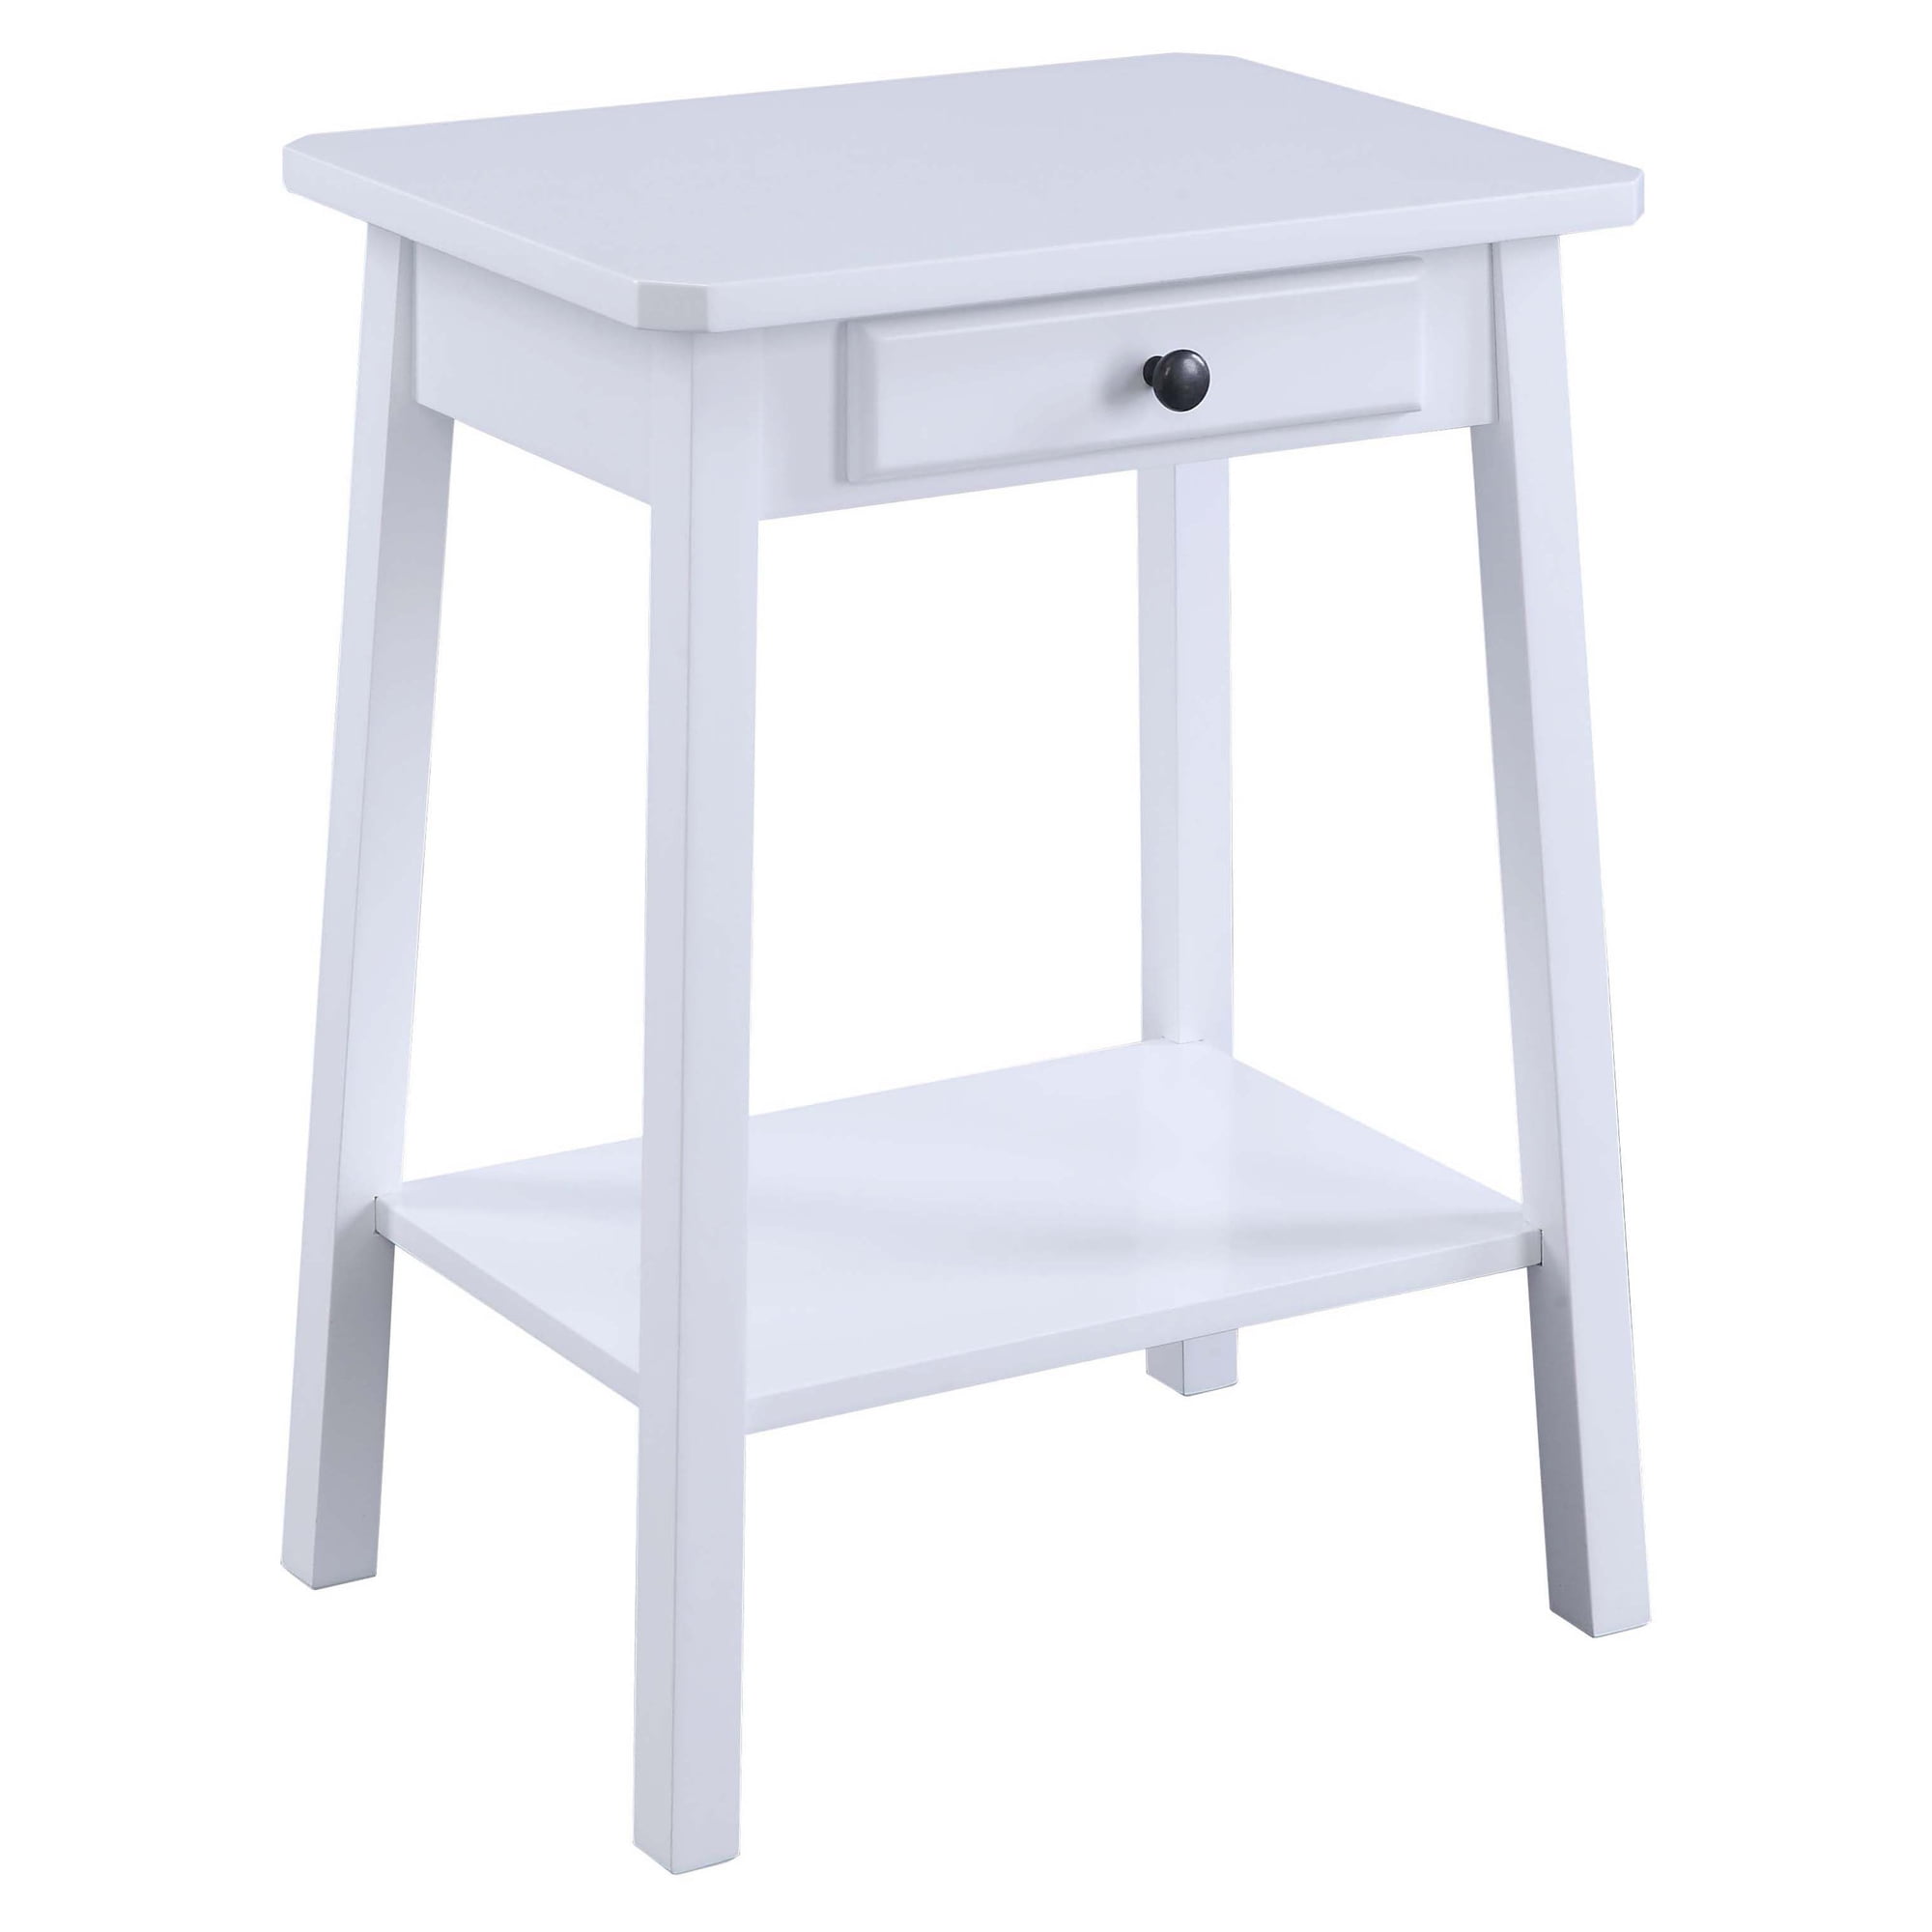 Picture of Acme Furniture 97859 24 x 13 x 18 in. Kaife Single Drawer Rectangle Accent Table, White